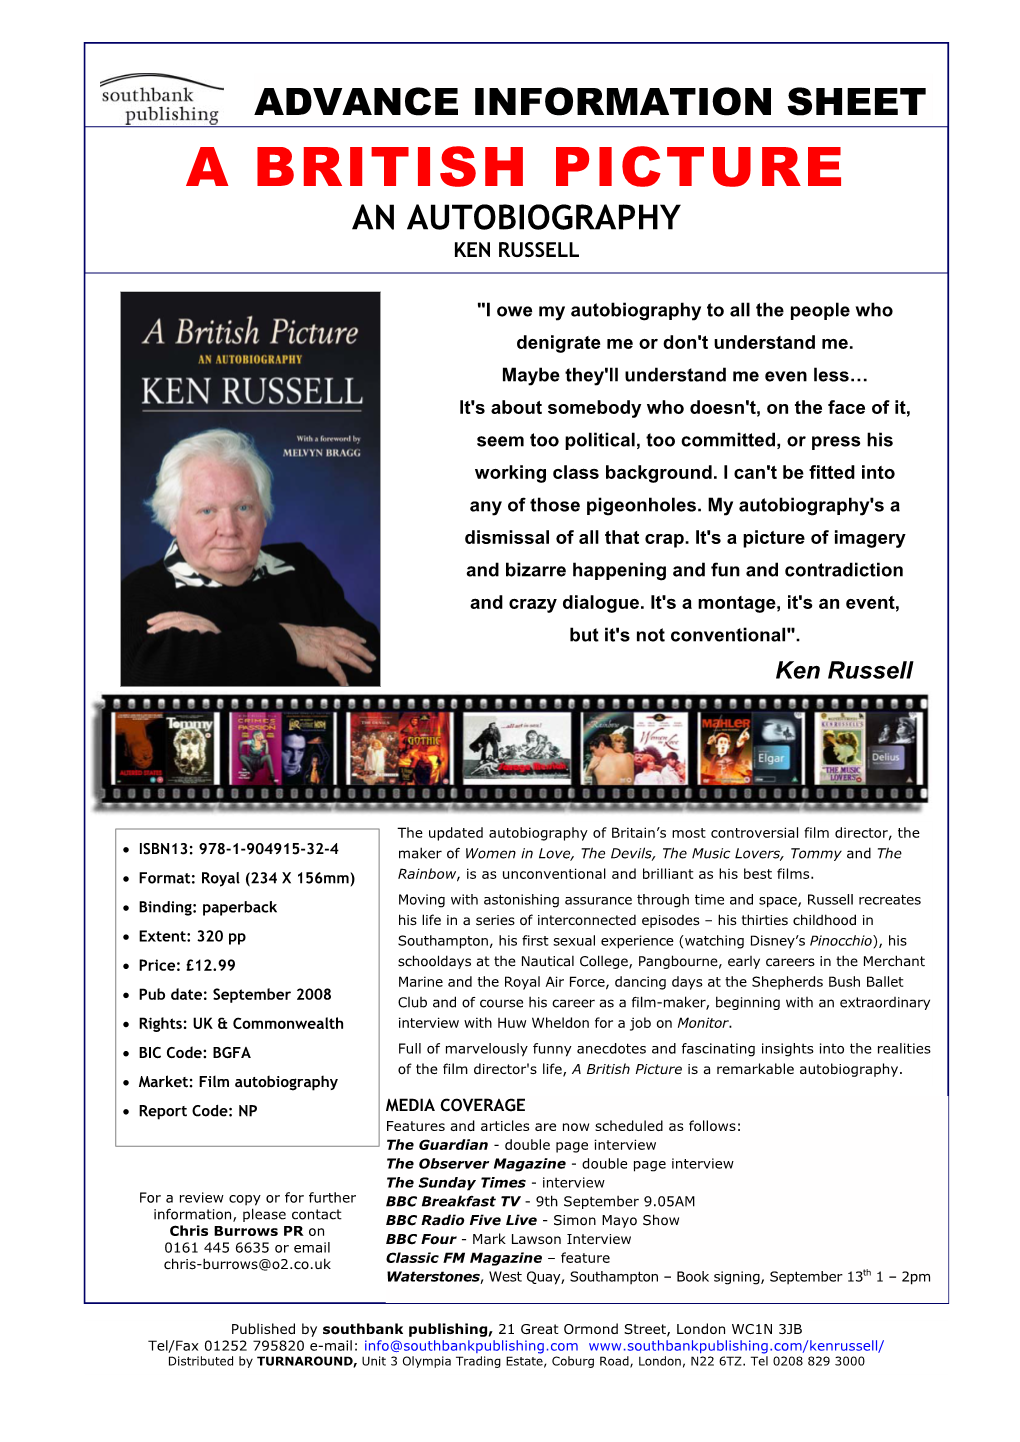 A British Picture an Autobiography Ken Russell